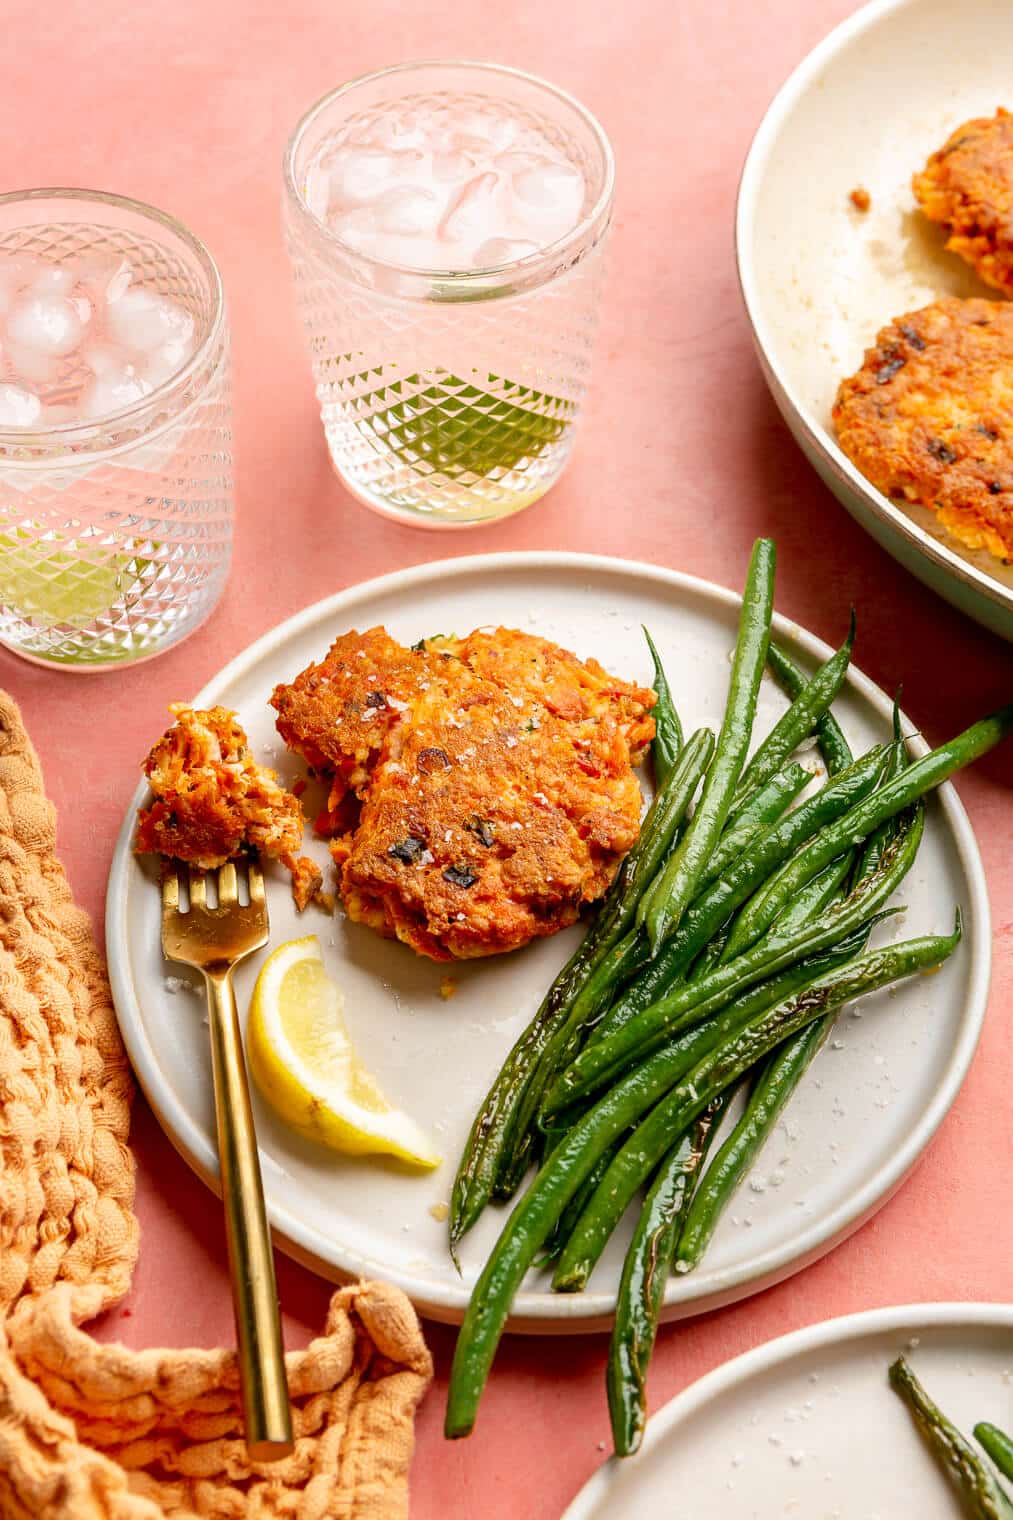 A salmon cake on a plate next to a lemon wedge and a serving of sauteed green beans.